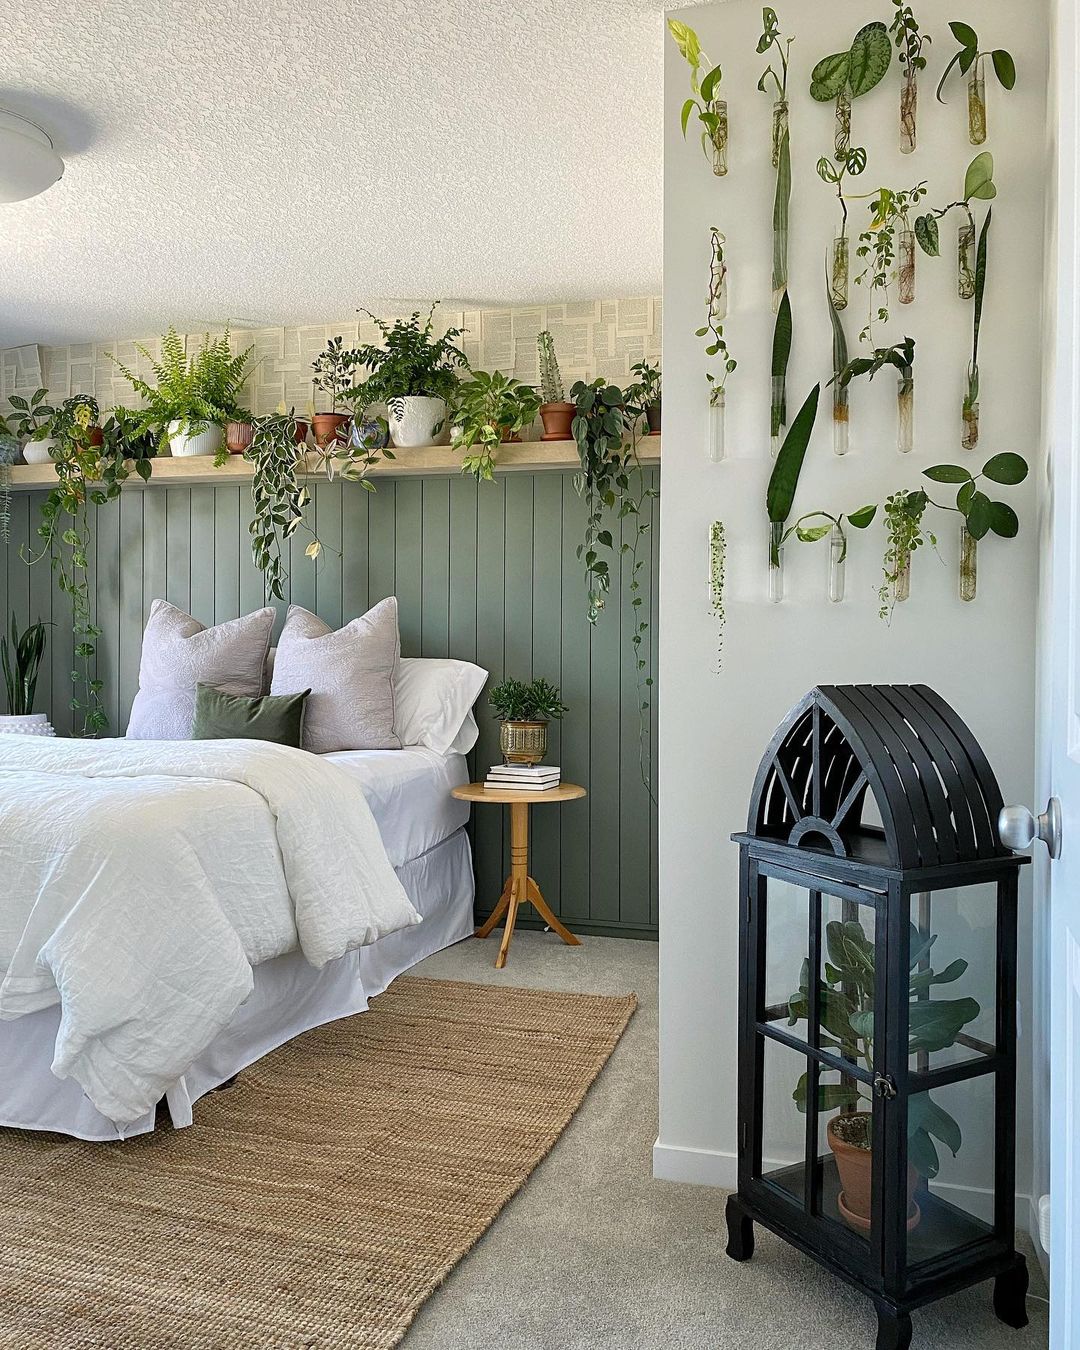 Bedroom Designed with Green Accents and Small Plants. Photo by Instagram user @thisisdrover